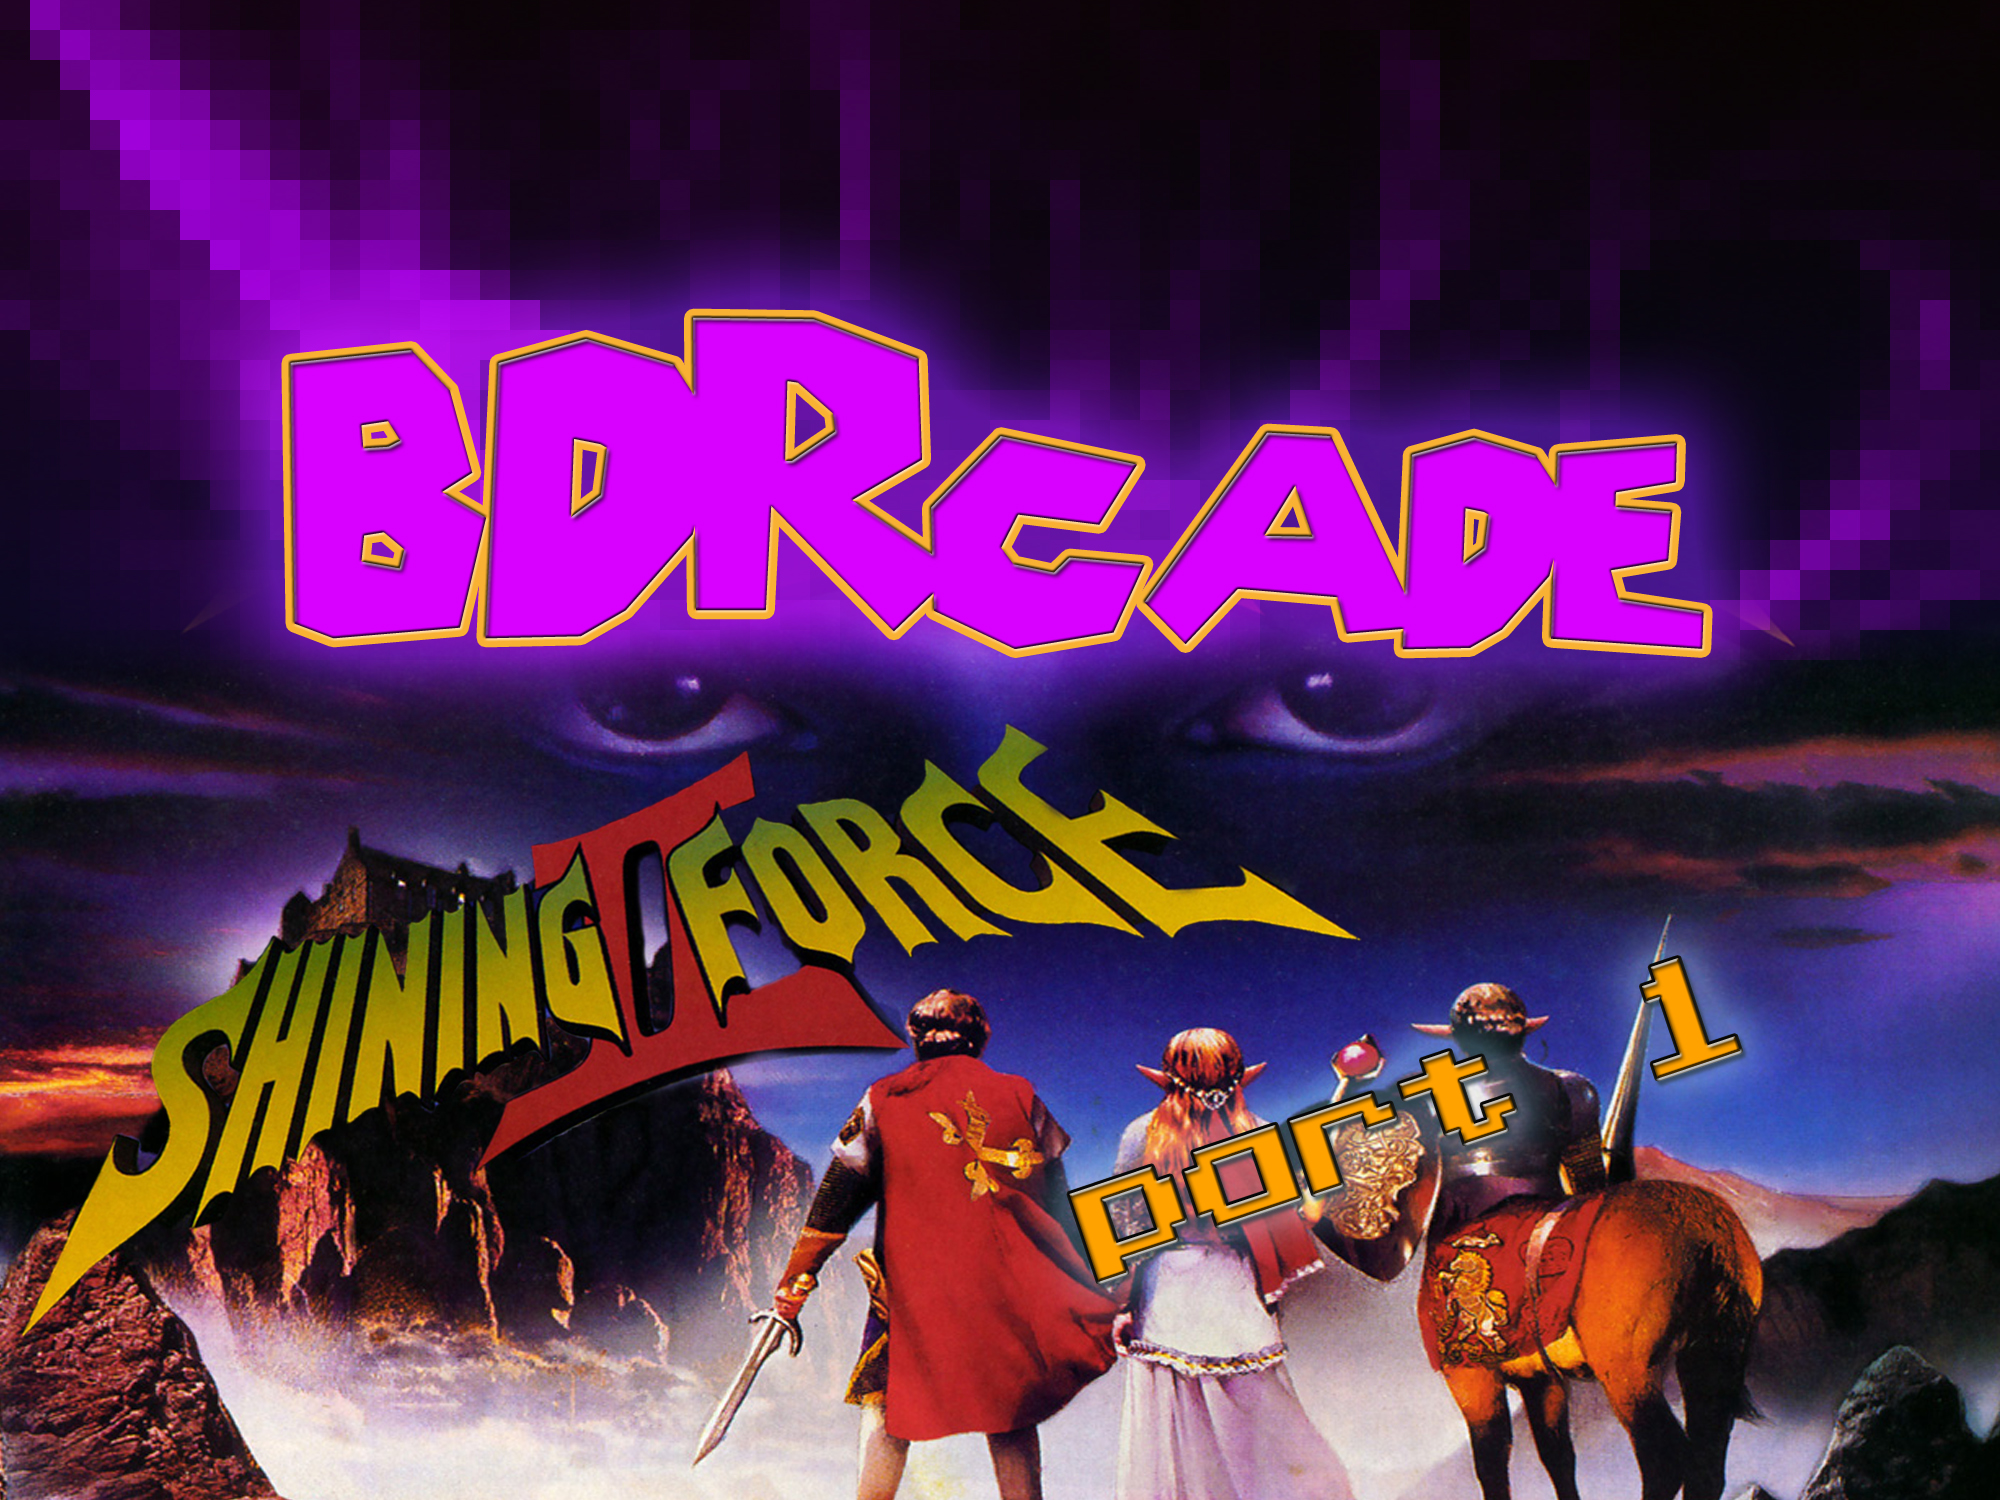 Shining Force II: We Have a “Perst” and a “Knert” – PART 1 – BDRcade